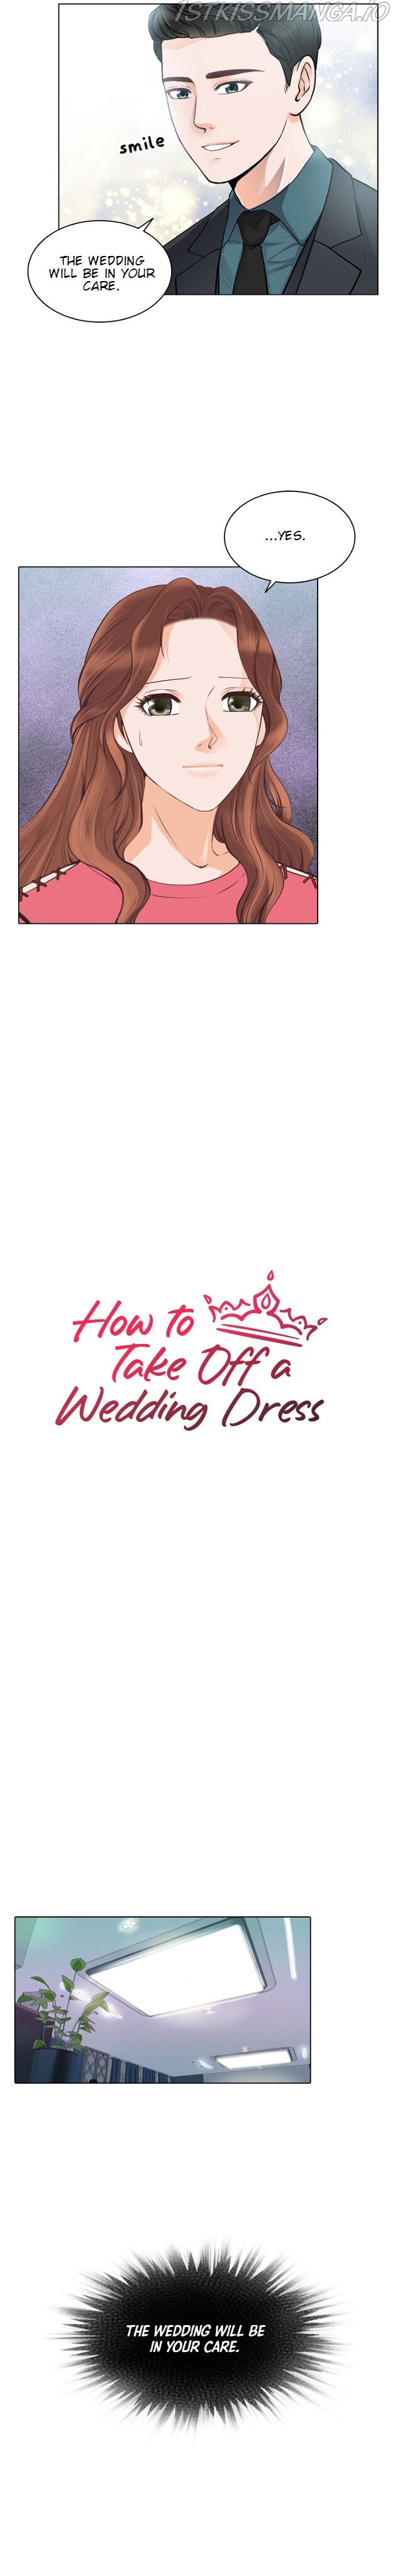 How to Take Off a Wedding Dress Chapter 7 - Page 3